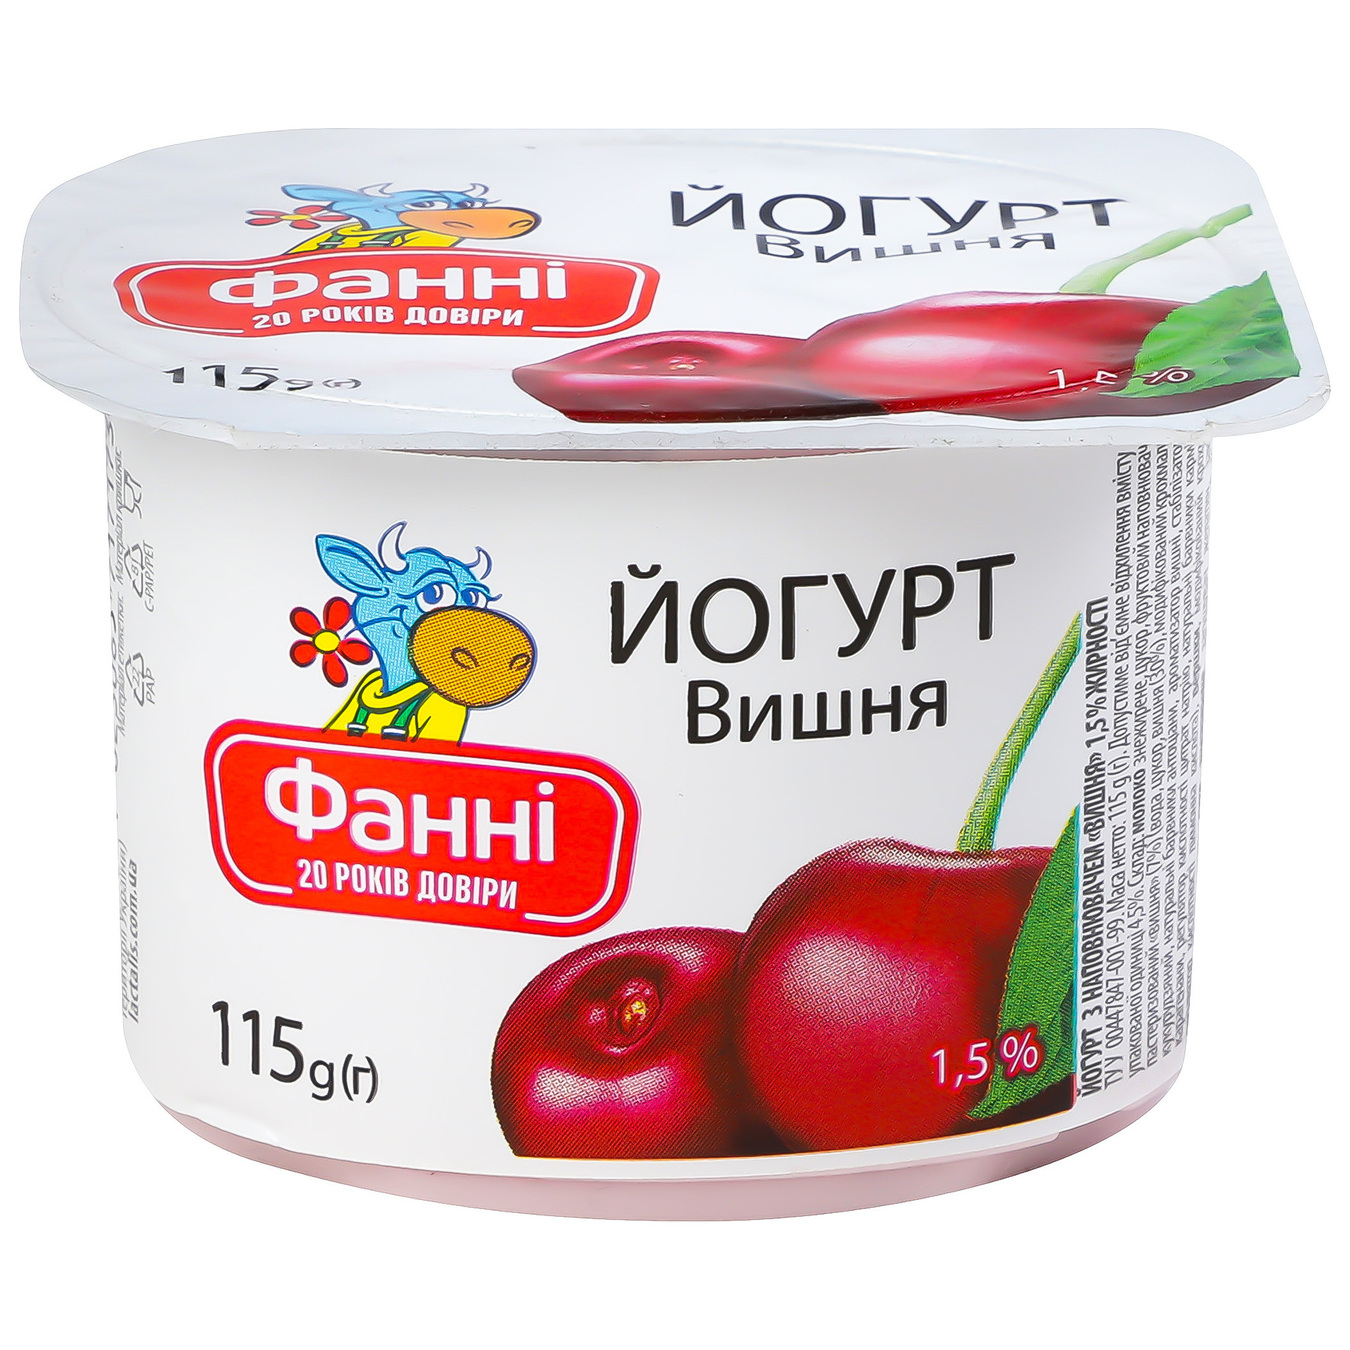 Fanny yogurt with cherry filling cup 1.5% 115g 2